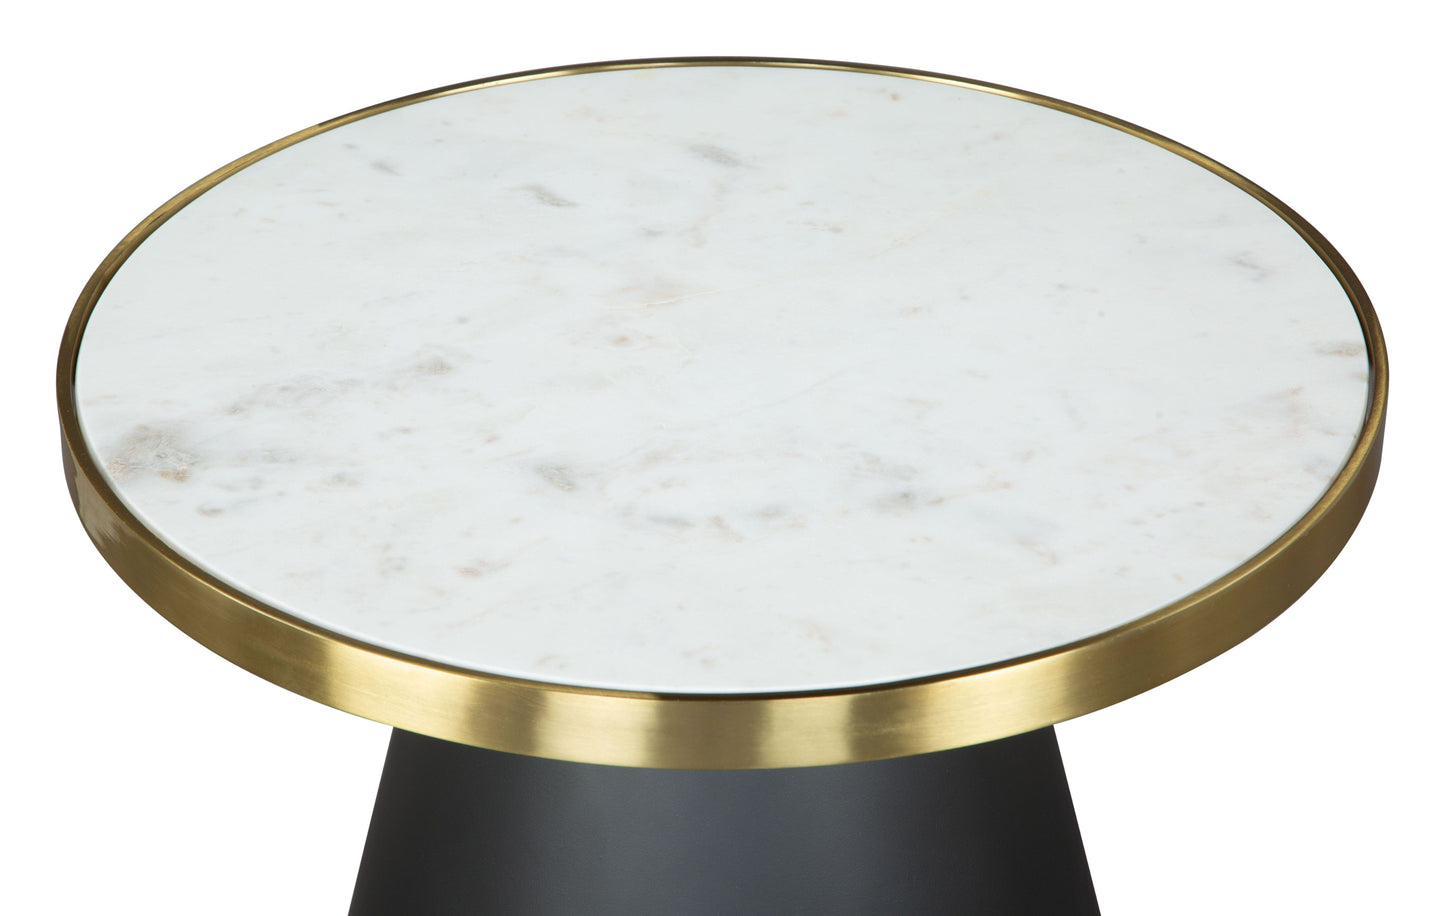 View of marble top with gold rim